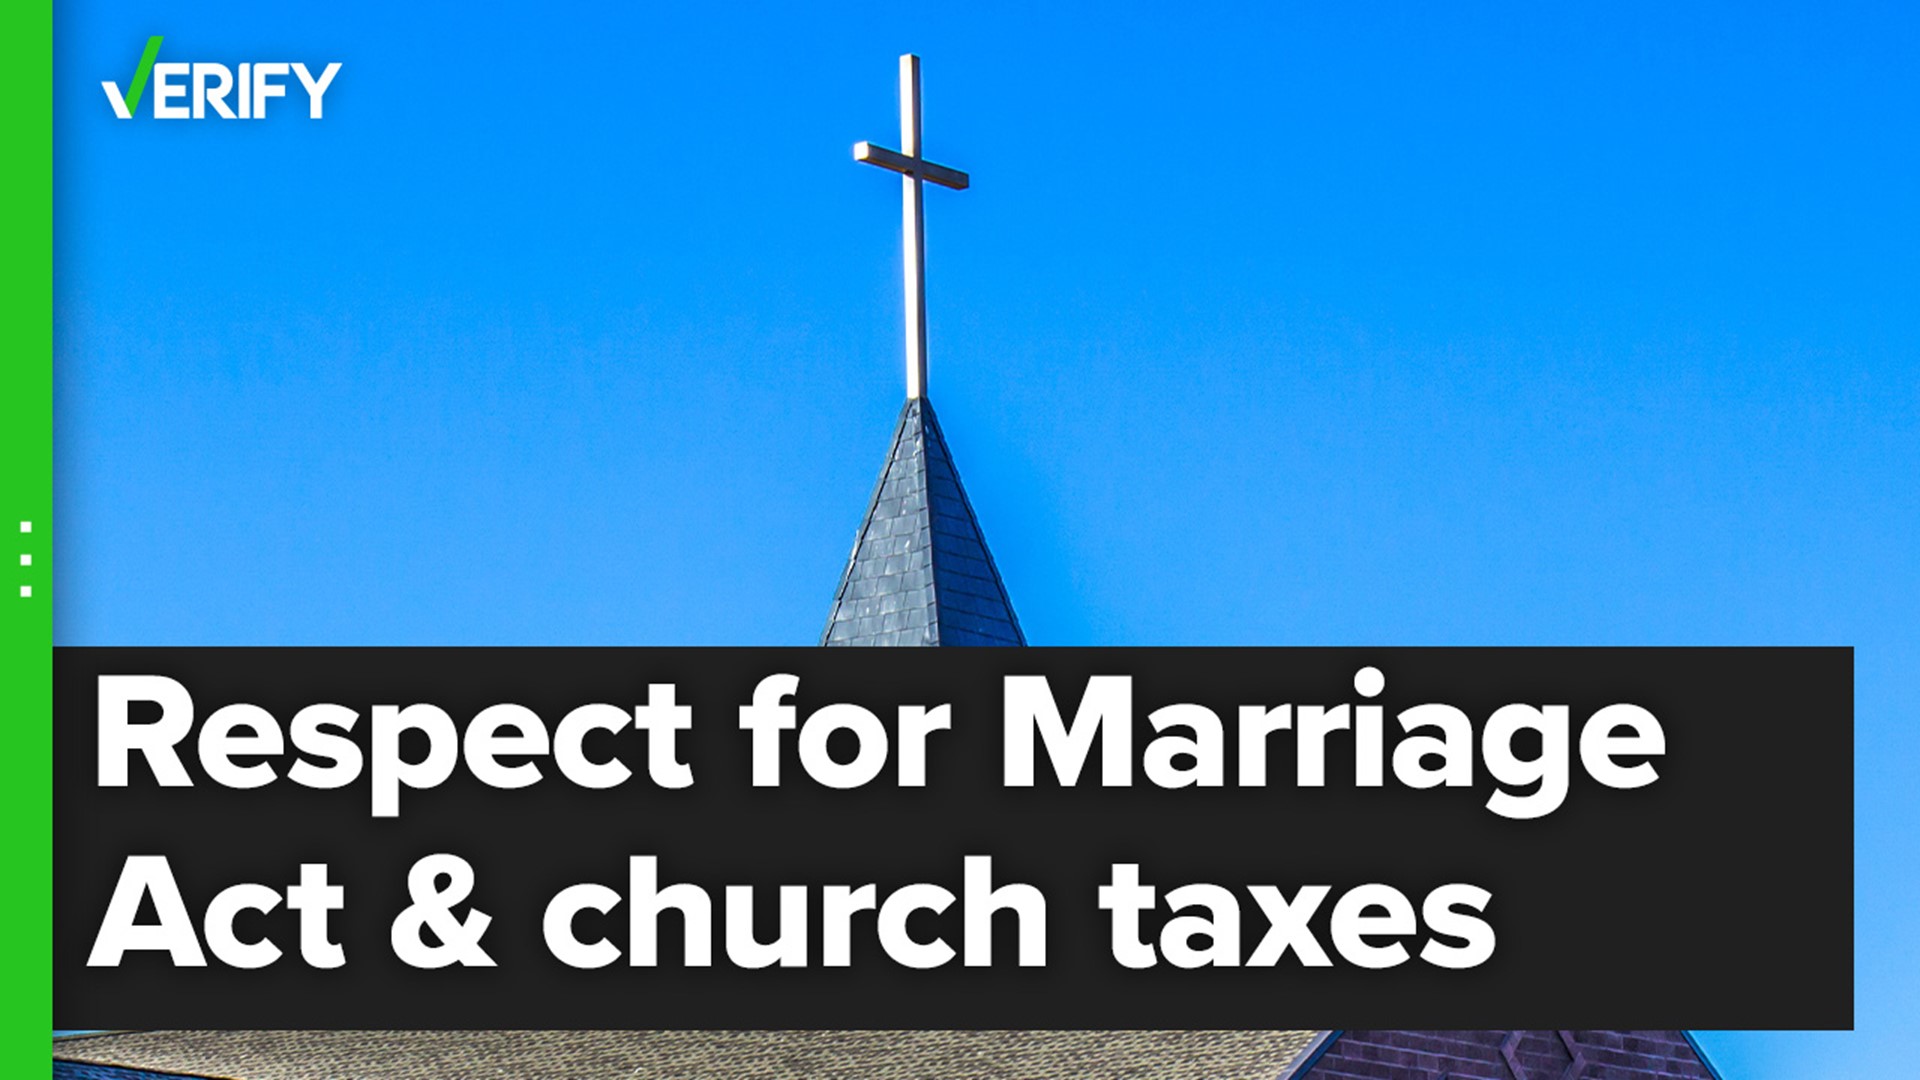 Churches that support same-sex marriage will not have their tax-exempt status revoked under the Respect for Marriage Act weareiowa image